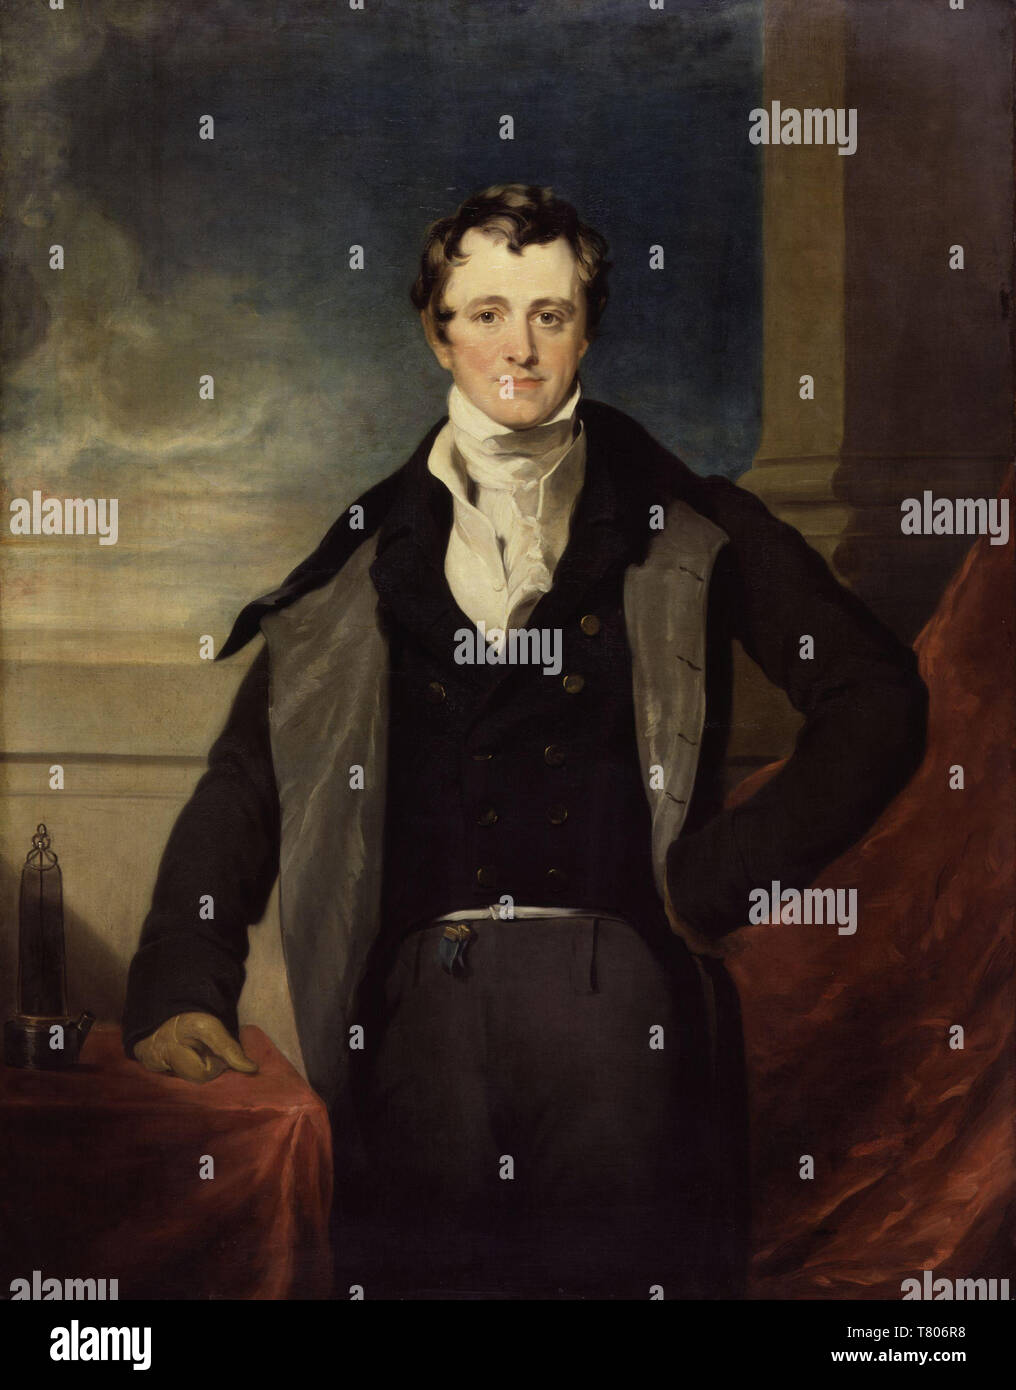 Humphry Davy, English Chemist and Inventor Stock Photo - Alamy